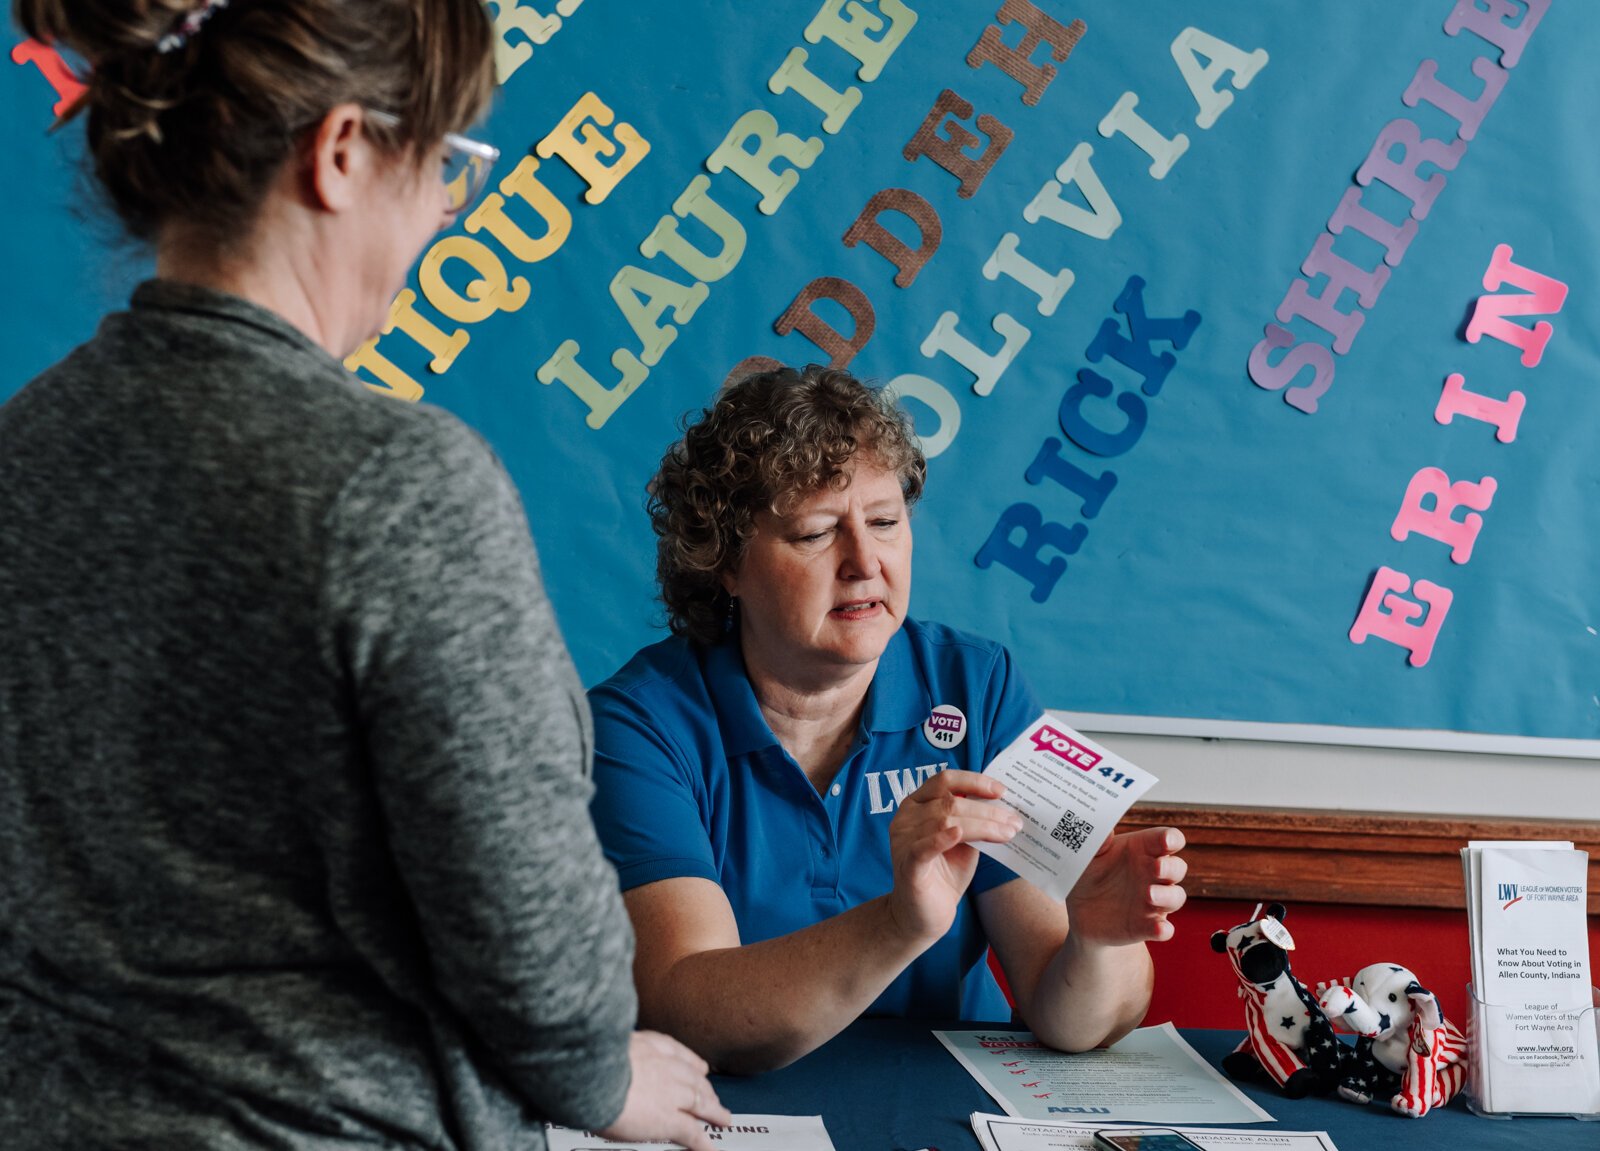 Betsy Kachmar, Co-President of League of Women Voters of Fort Wayne, right,  talks with Chris Castaldi about voting at the Allen County Public Library Tecumseh branch.